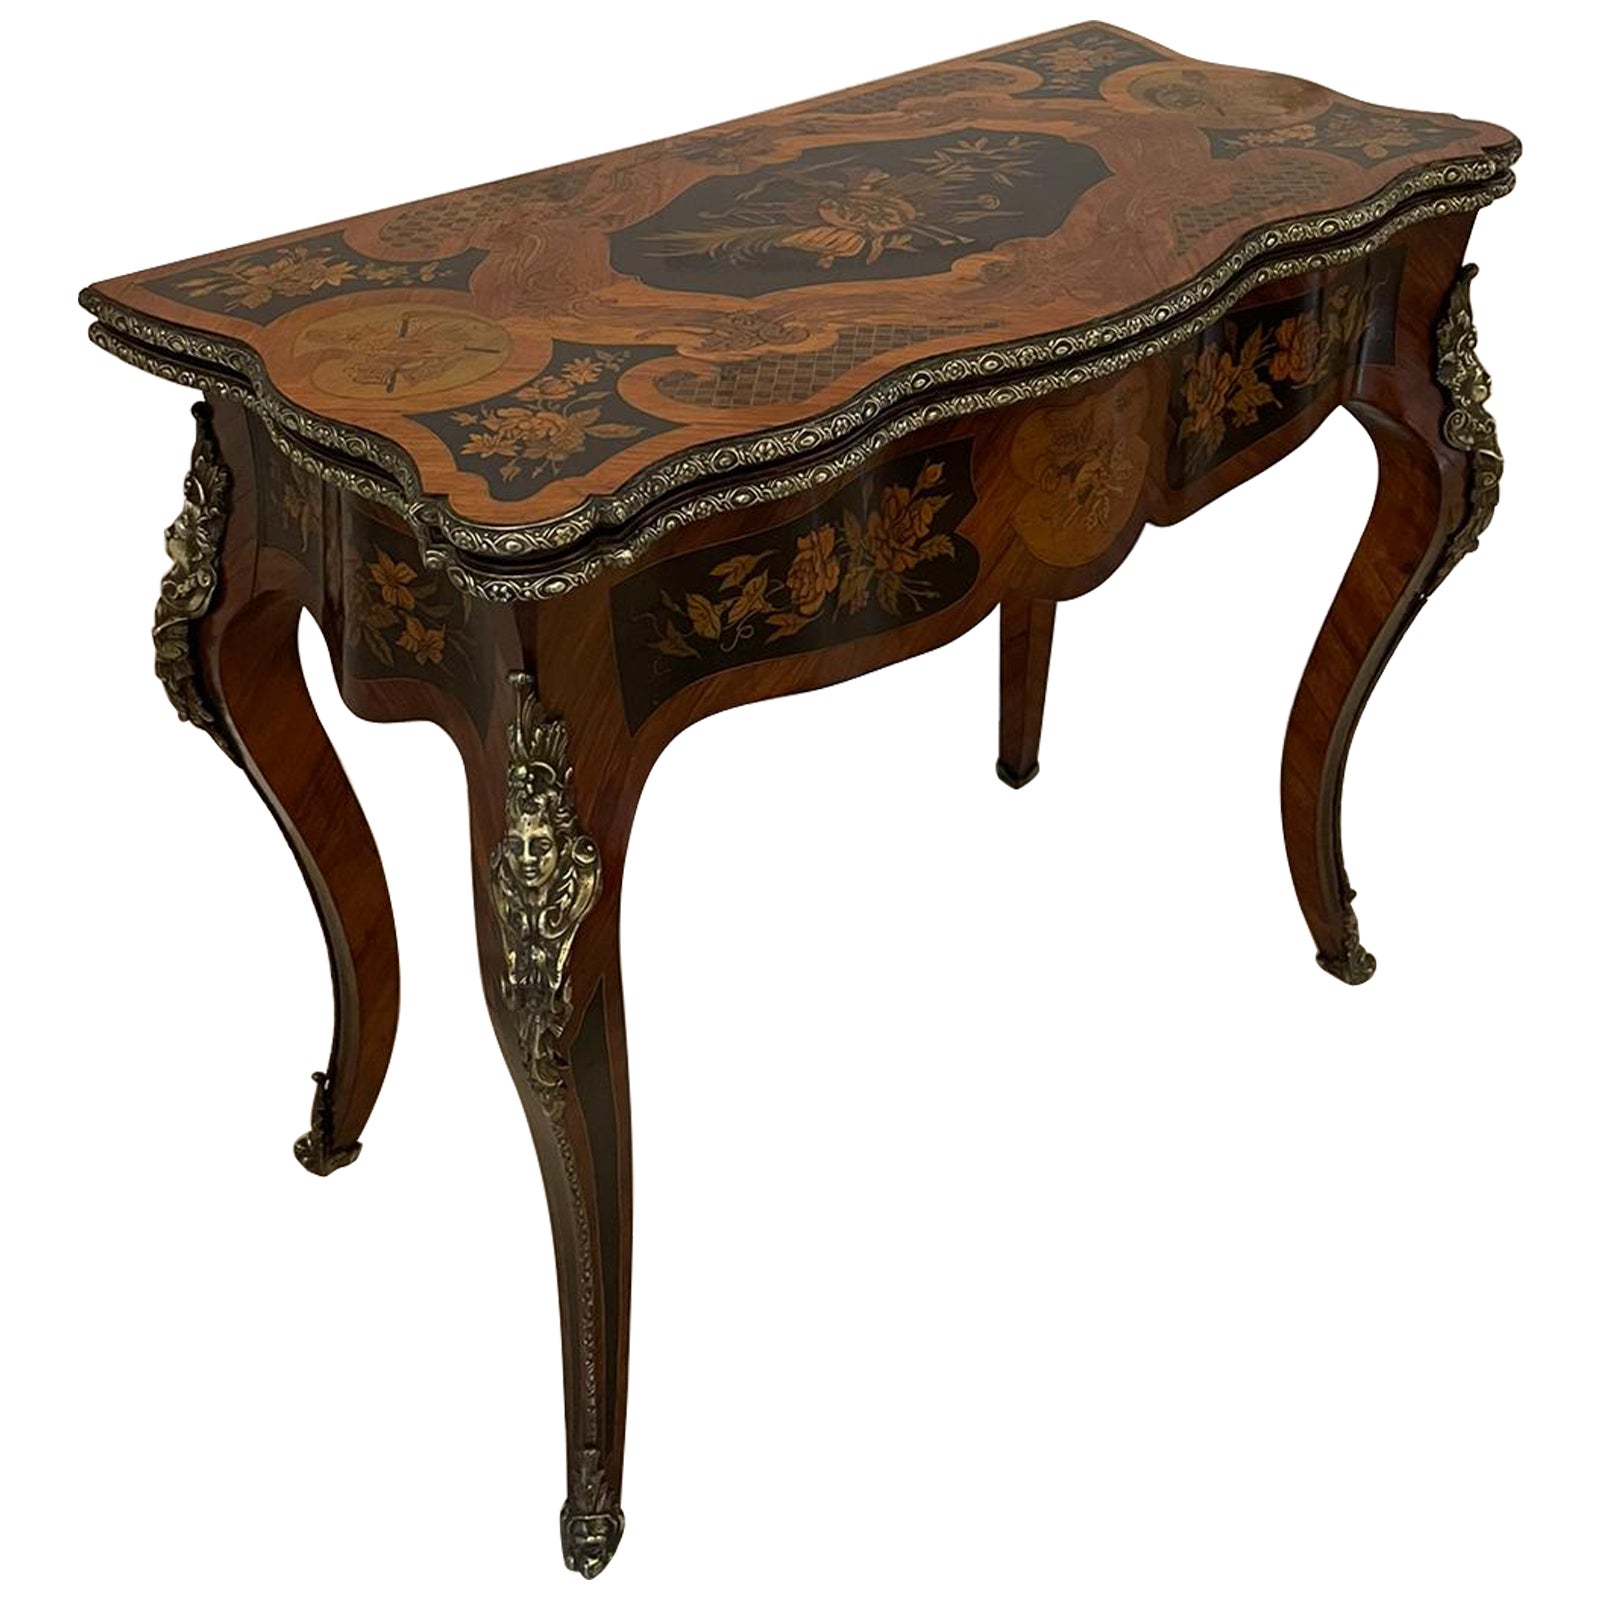 Fine Antique French Kingwood Marquetry Inlaid Ormolu Mounted Card/Side Table